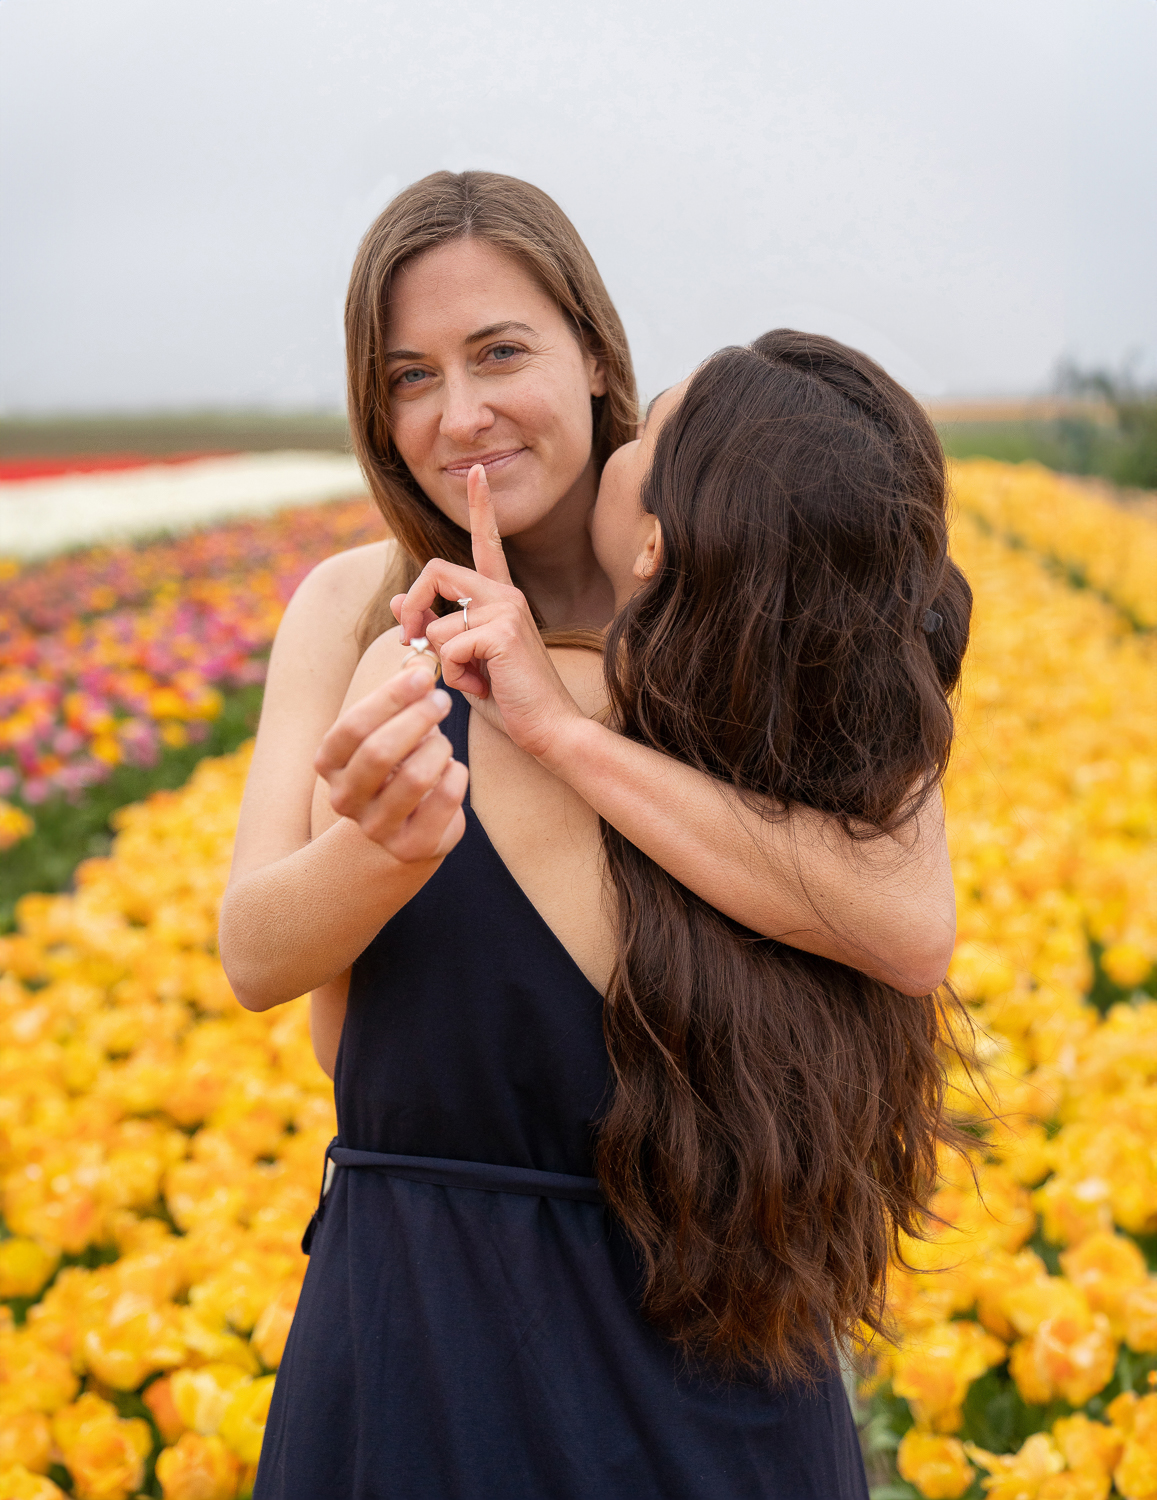 Woman hiding a ring behind for making a surprise proposal to her girlfriend surrounded by orange tulip fields.